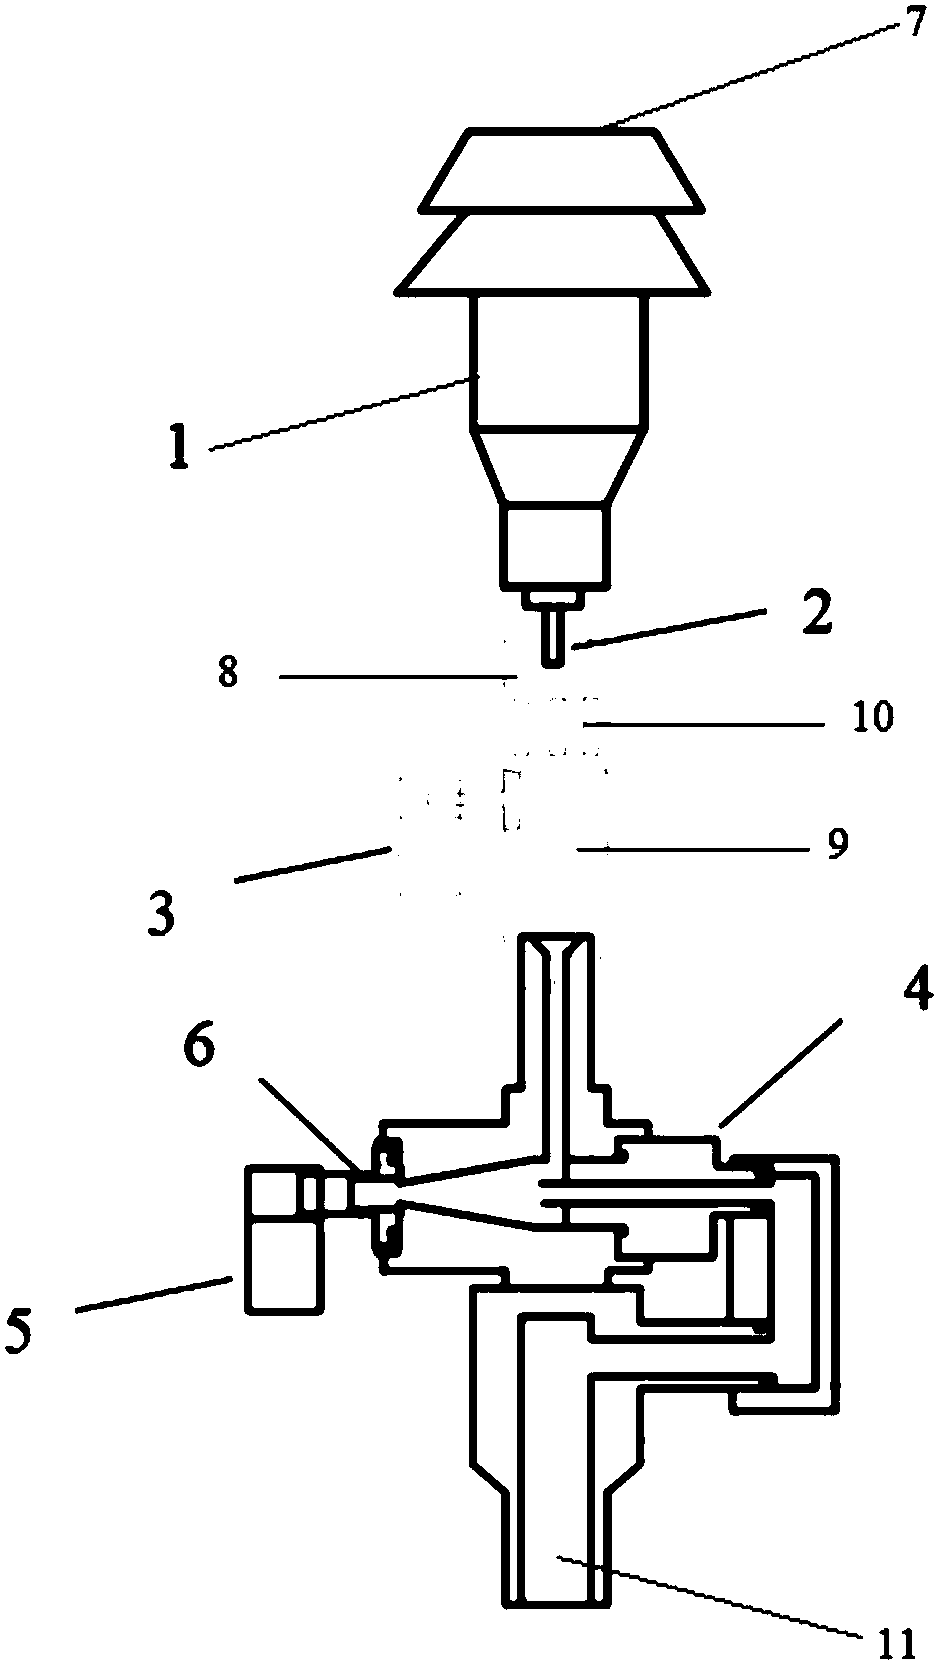 Two-stage cloud water collector and collection method based on impact and cyclone cutting